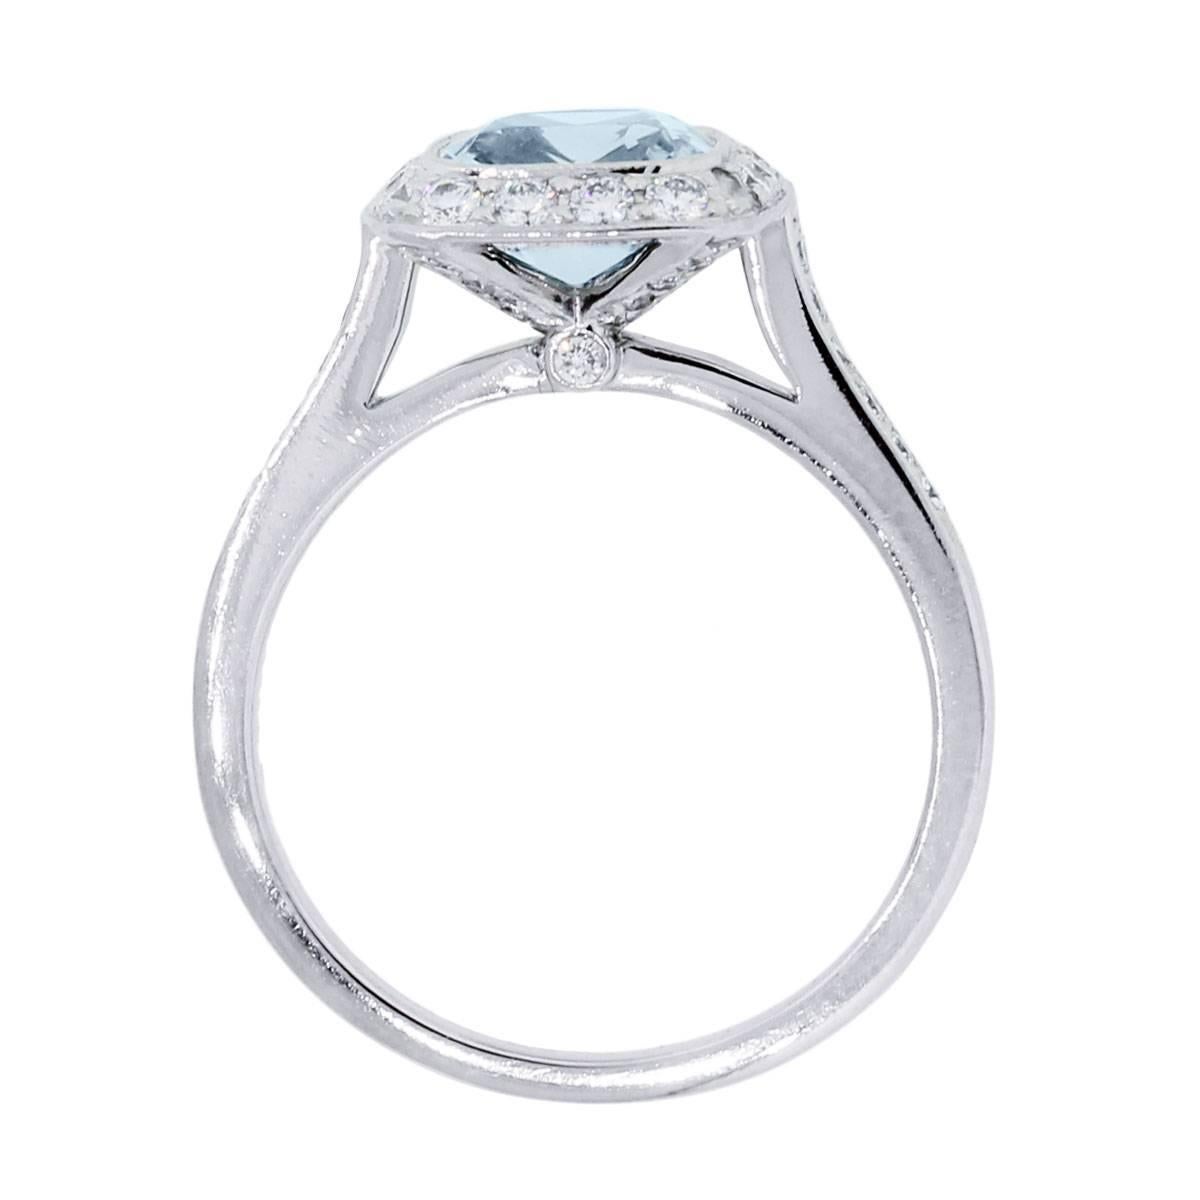 Designer: Tiffany & Co.
Material: Platinum
Diamond Details: 0.42ctw of round brilliant diamonds. Diamonds are F/G in color and VS1 in clarity
Gemstone Details: 1.63ct Cushion cut Aquamarine
Ring Size: 7.5 (can be sized)
Ring Measurements: 1.06